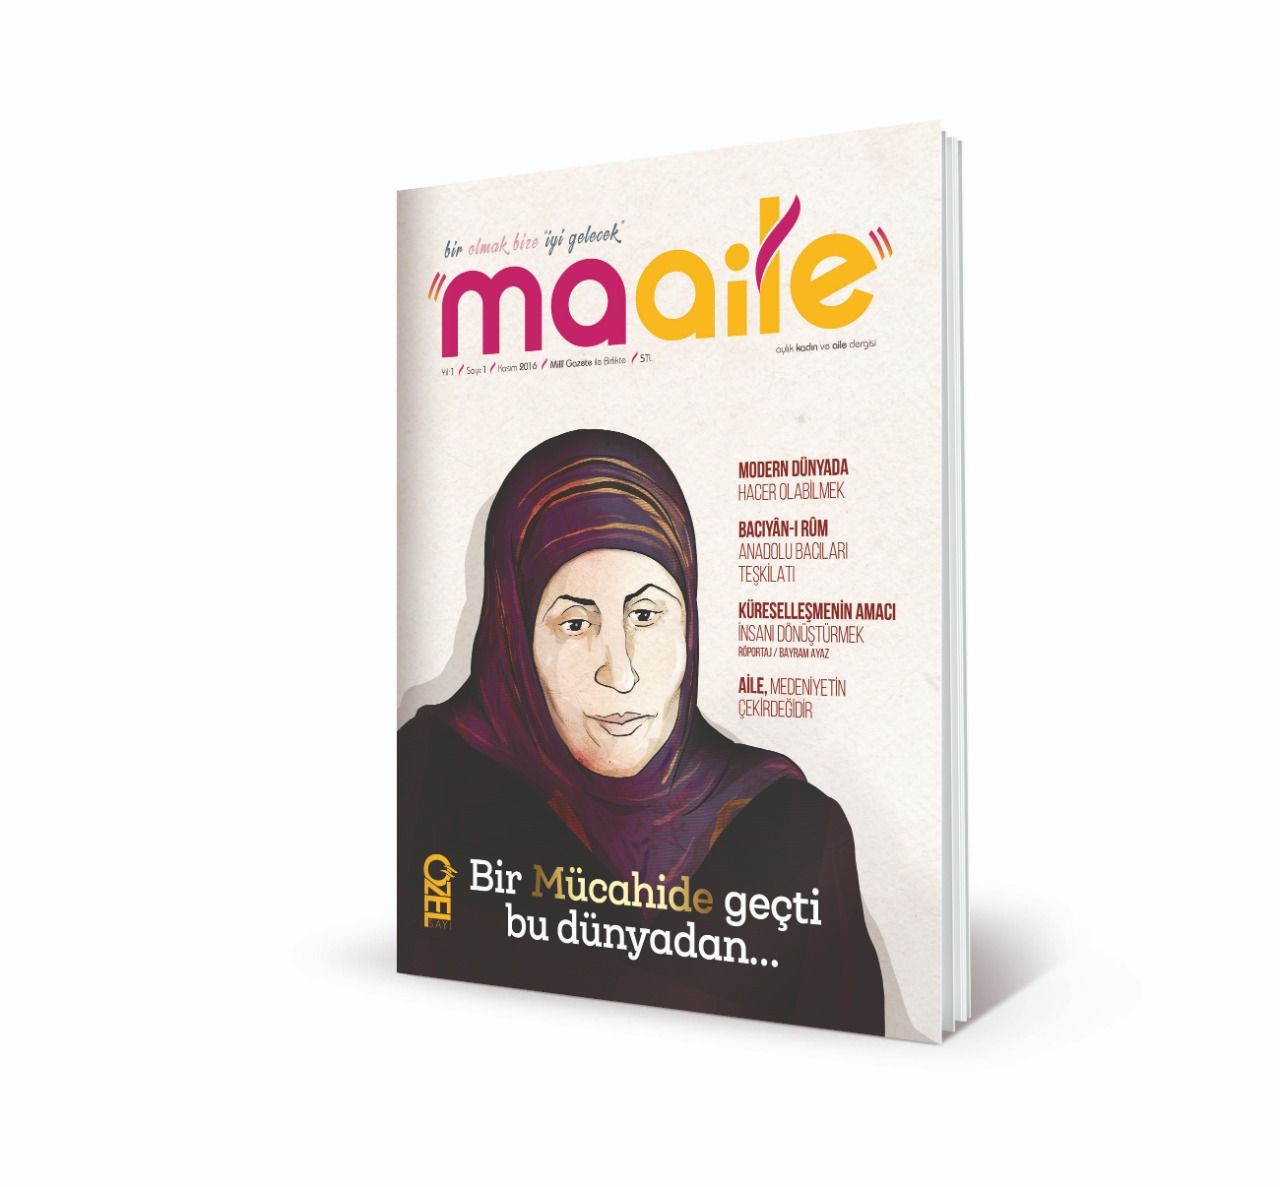 Our family's magazine Maaile celebrates 7th publication year